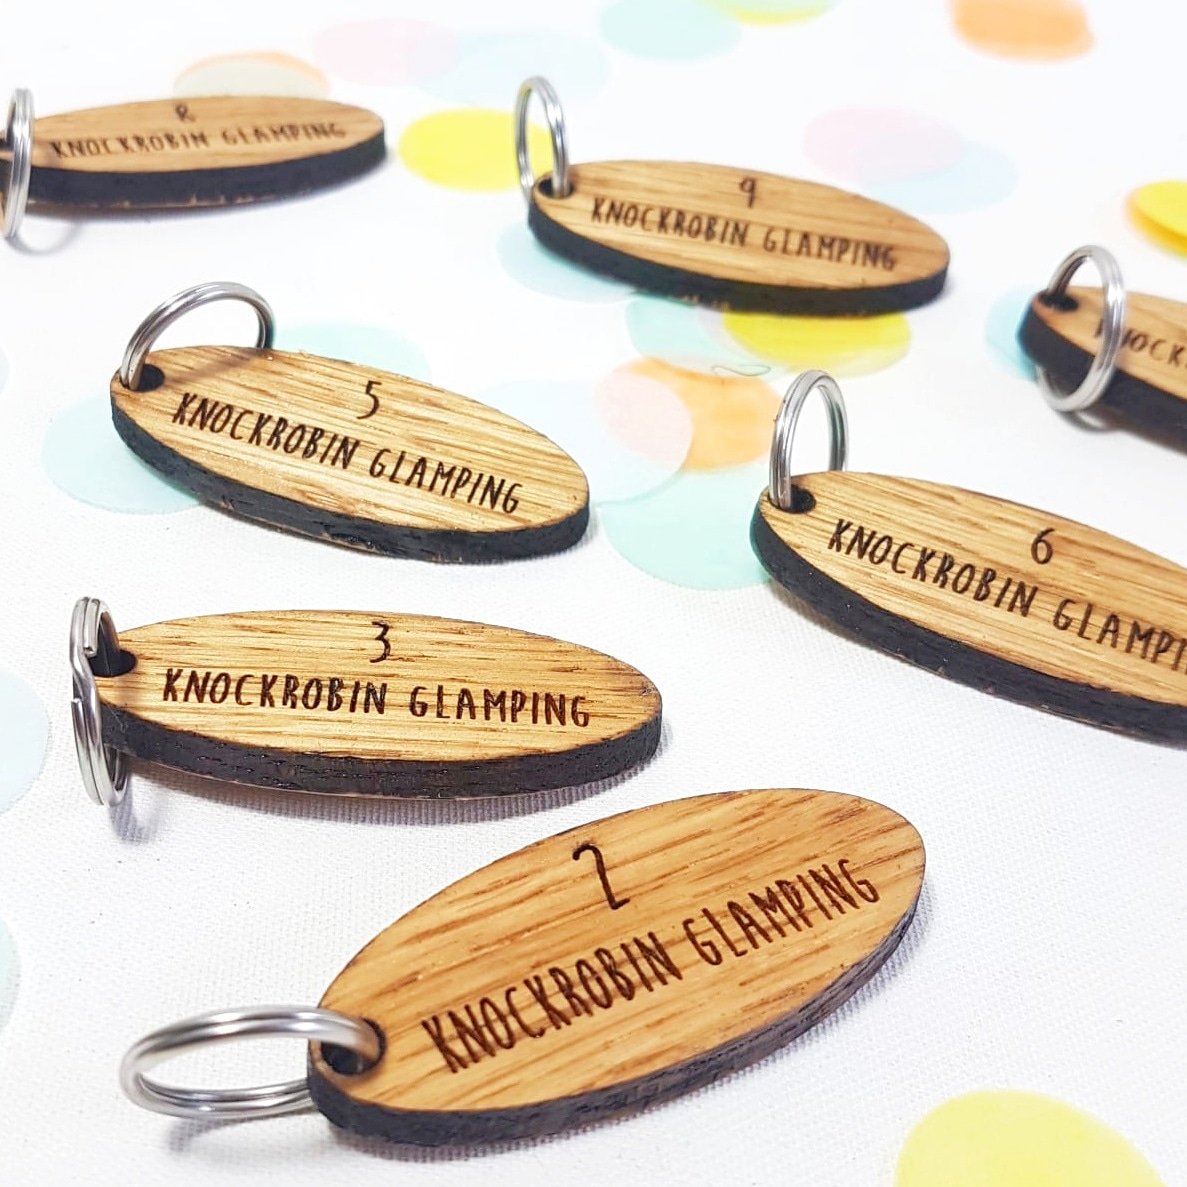 Another gorgeous set of solid oak wood keyrings for our Glamping Client's Huts! #glamping #camping #keyring #wood #handmade